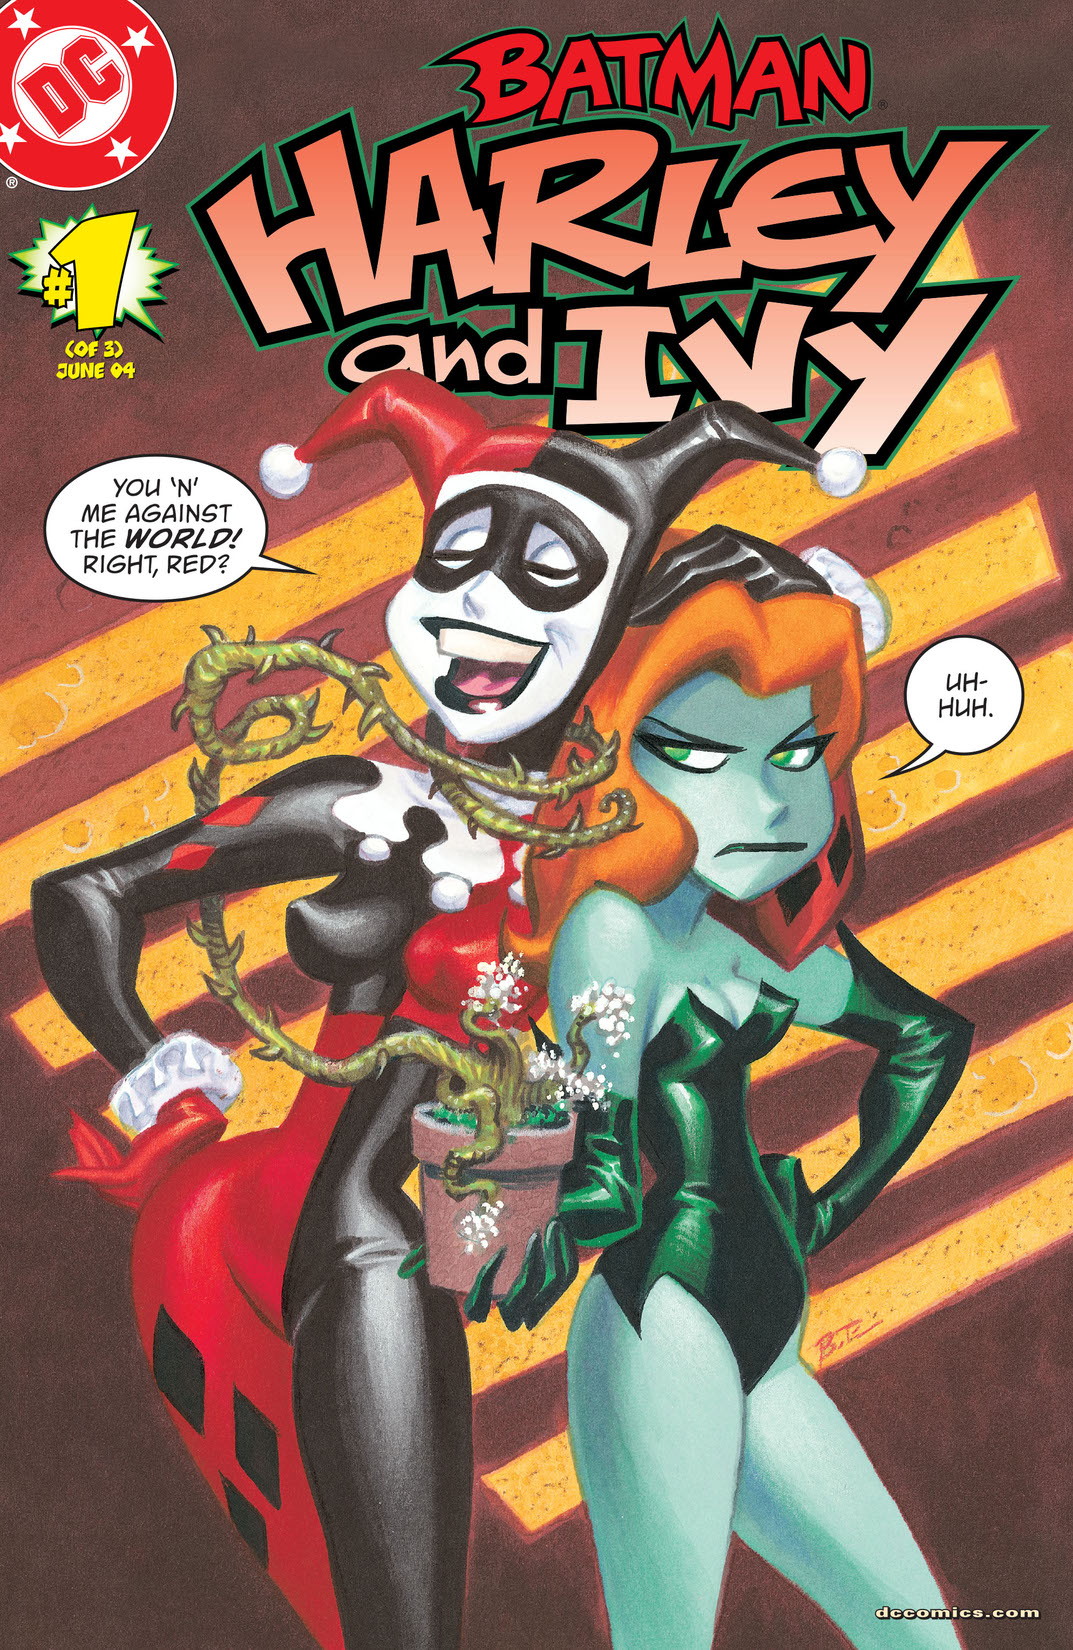 Batman: Harley & Ivy #1 preview images